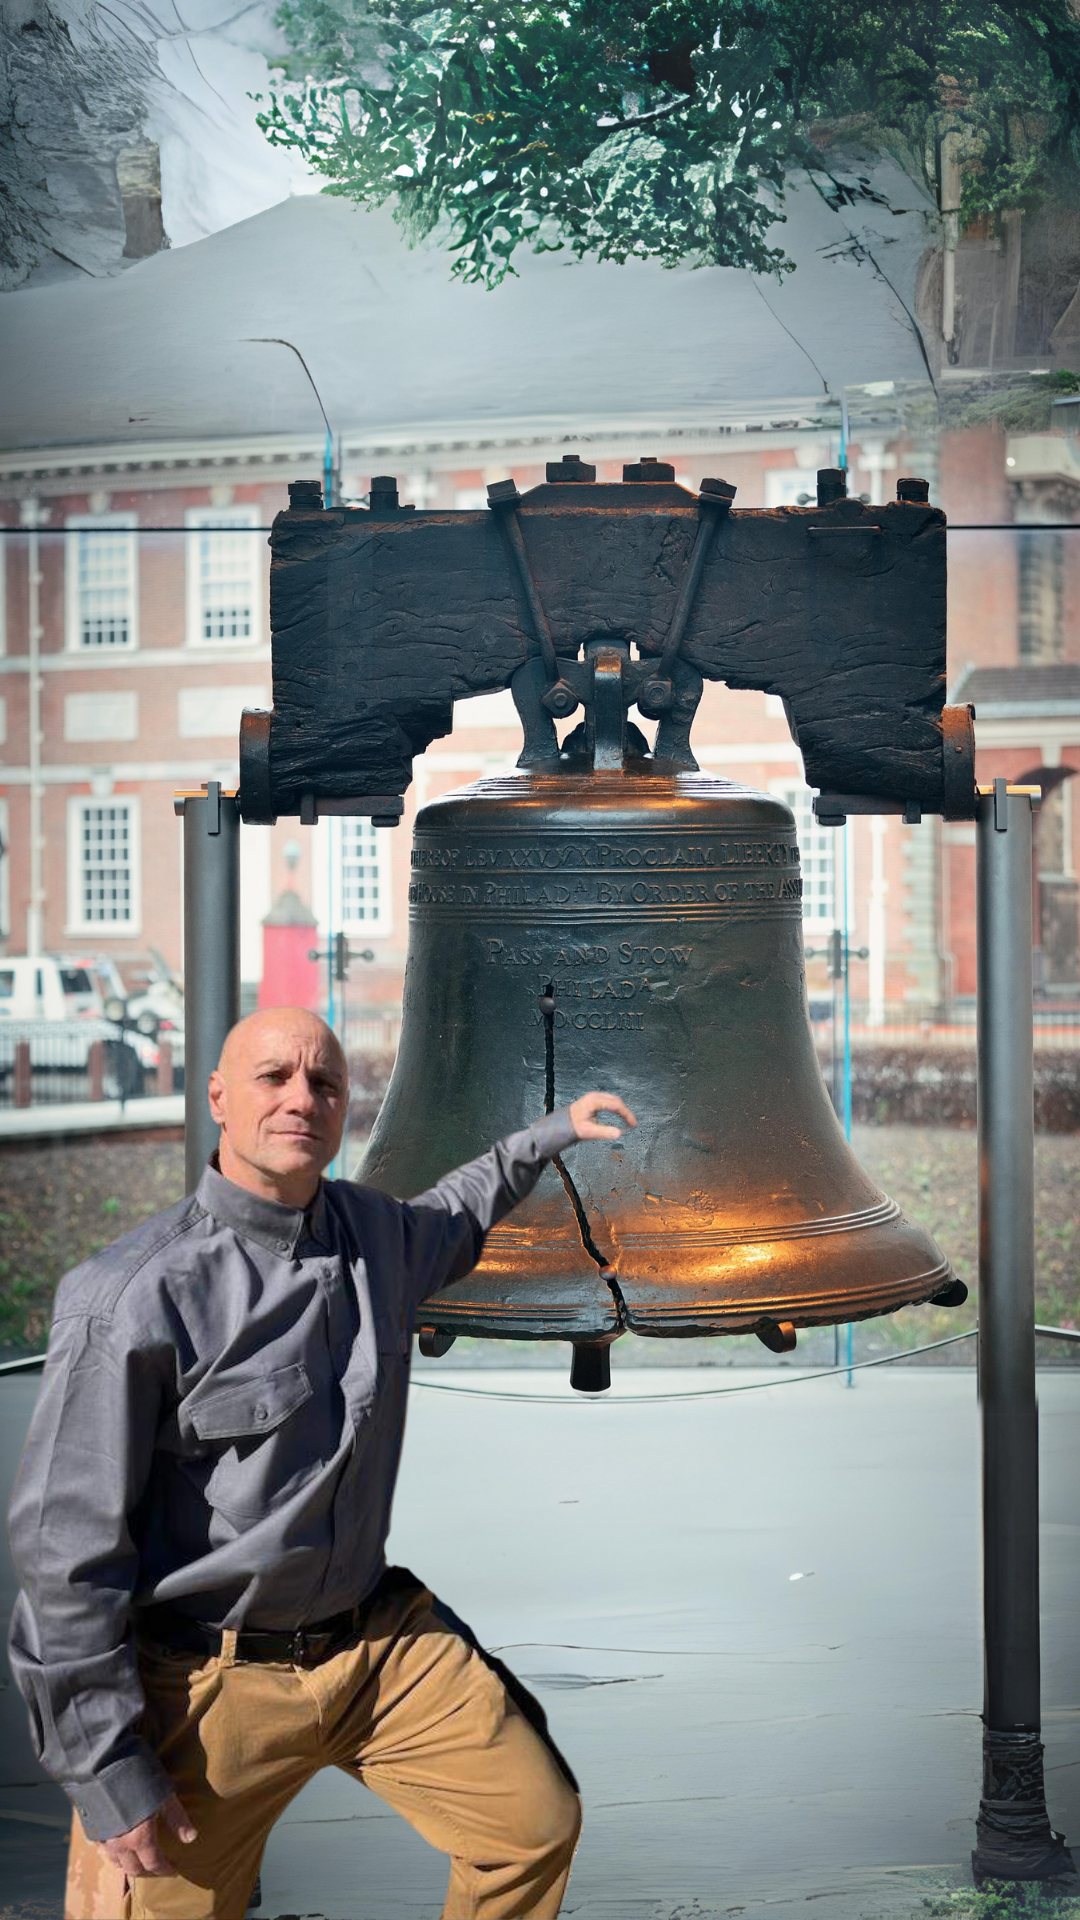 "Christian Lowery standing by the Liberty Bell, symbolizing freedom and the spirit of independence."